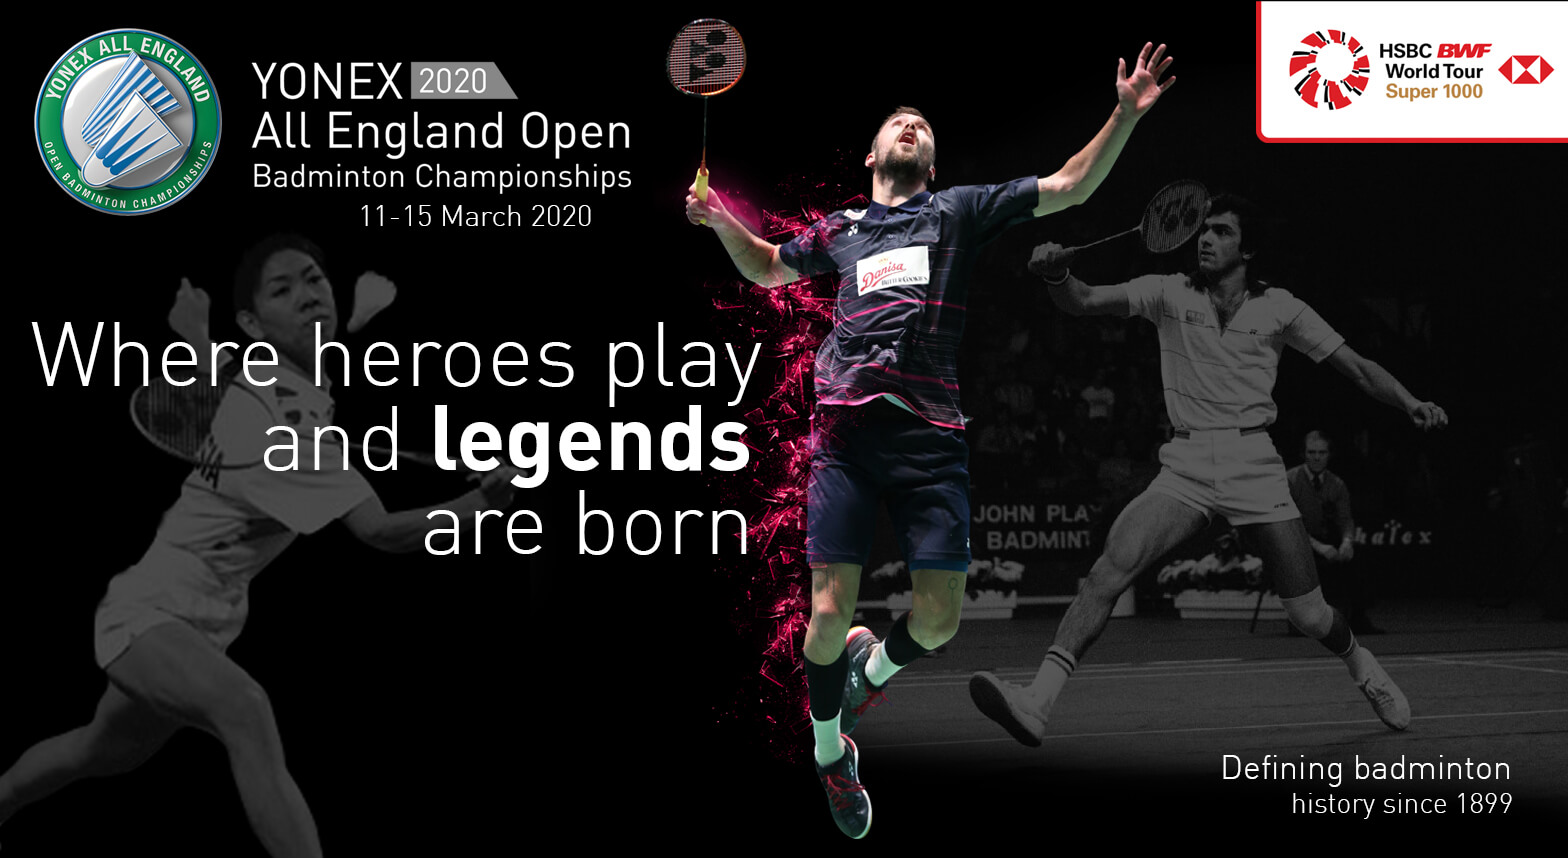 All England. Live streaming Badminton all England. Modern Badminton in the uk. Live streaming all england